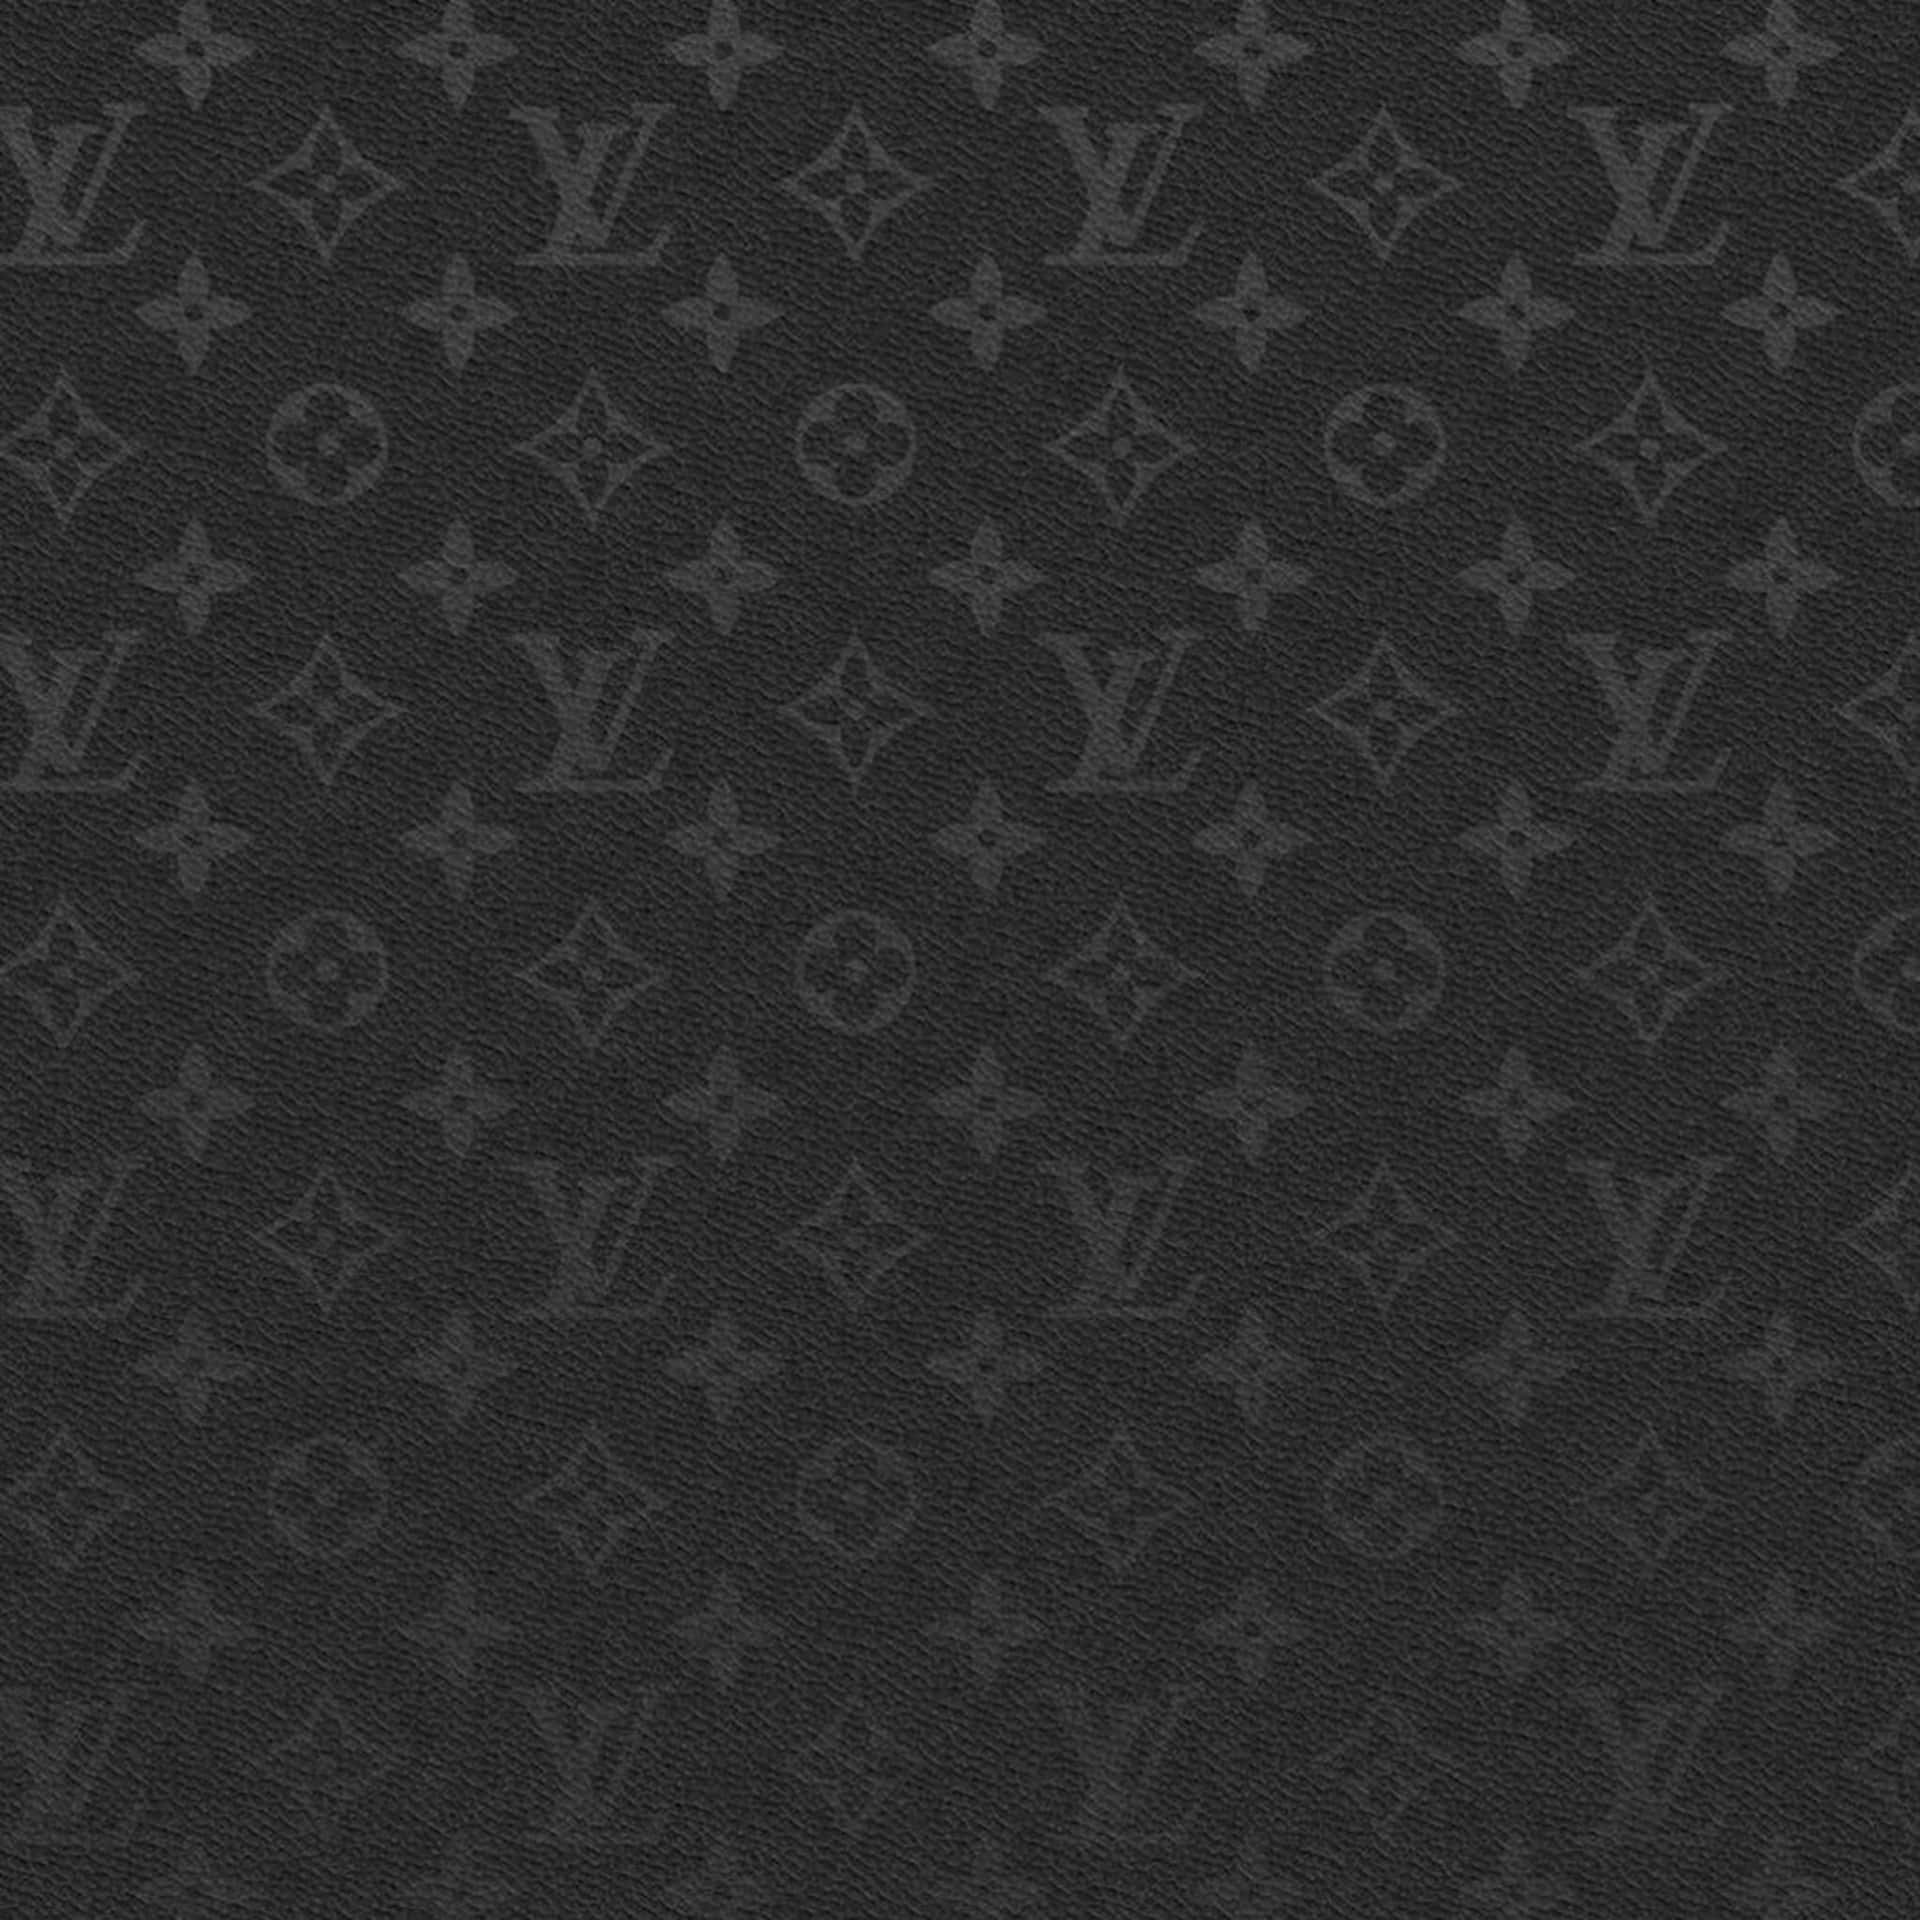 Download More Than Just a Symbol, an Icon Wallpaper